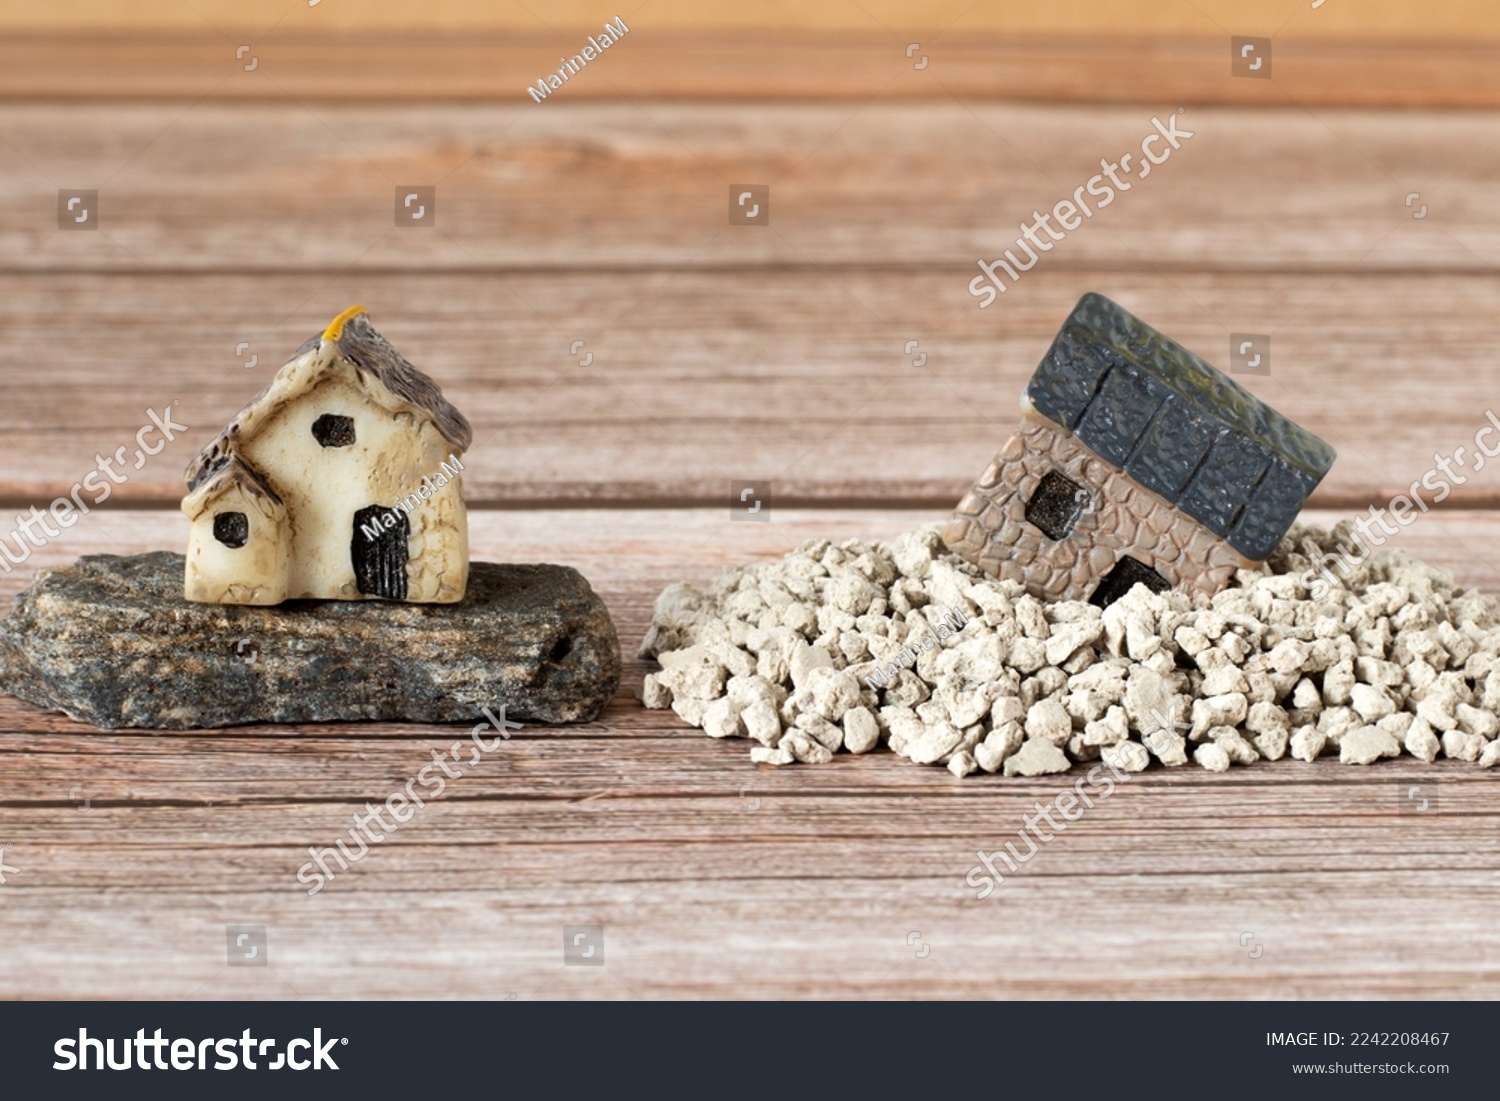 Two miniature houses in sand and on rock (stone). Copy space. A close-up. Solid foundation gospel parable of Jesus Christ, obedience, and faith in God. Christian biblical concept. #2242208467